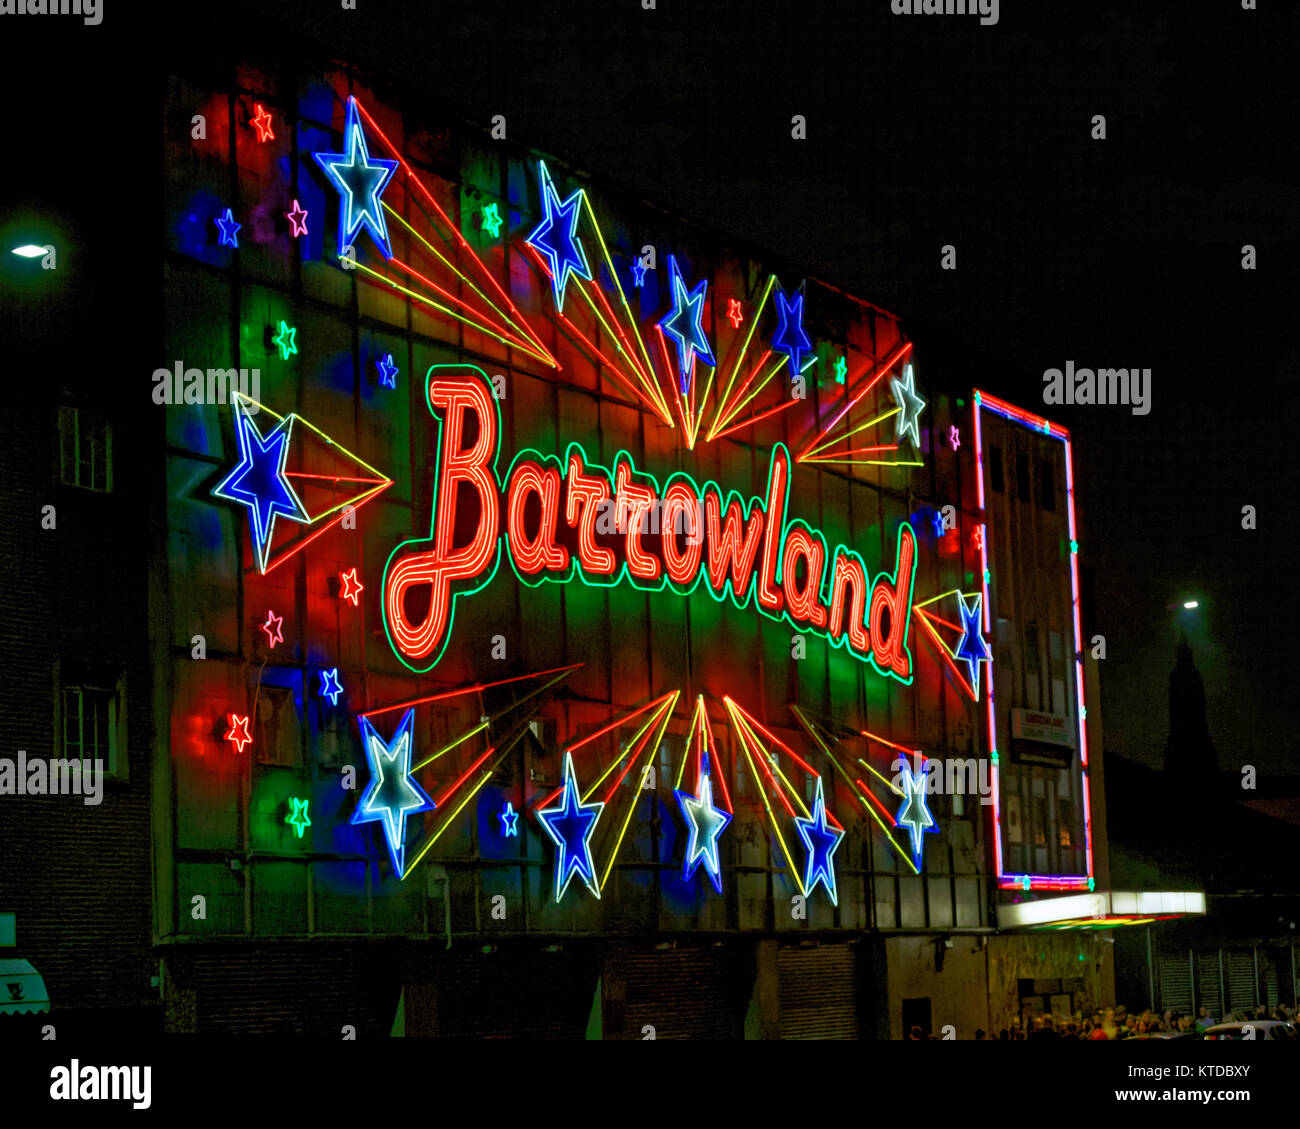 Glasgow barrowland sign neon lit up on the night of the Gerry Cinnamon concert show Stock Photo